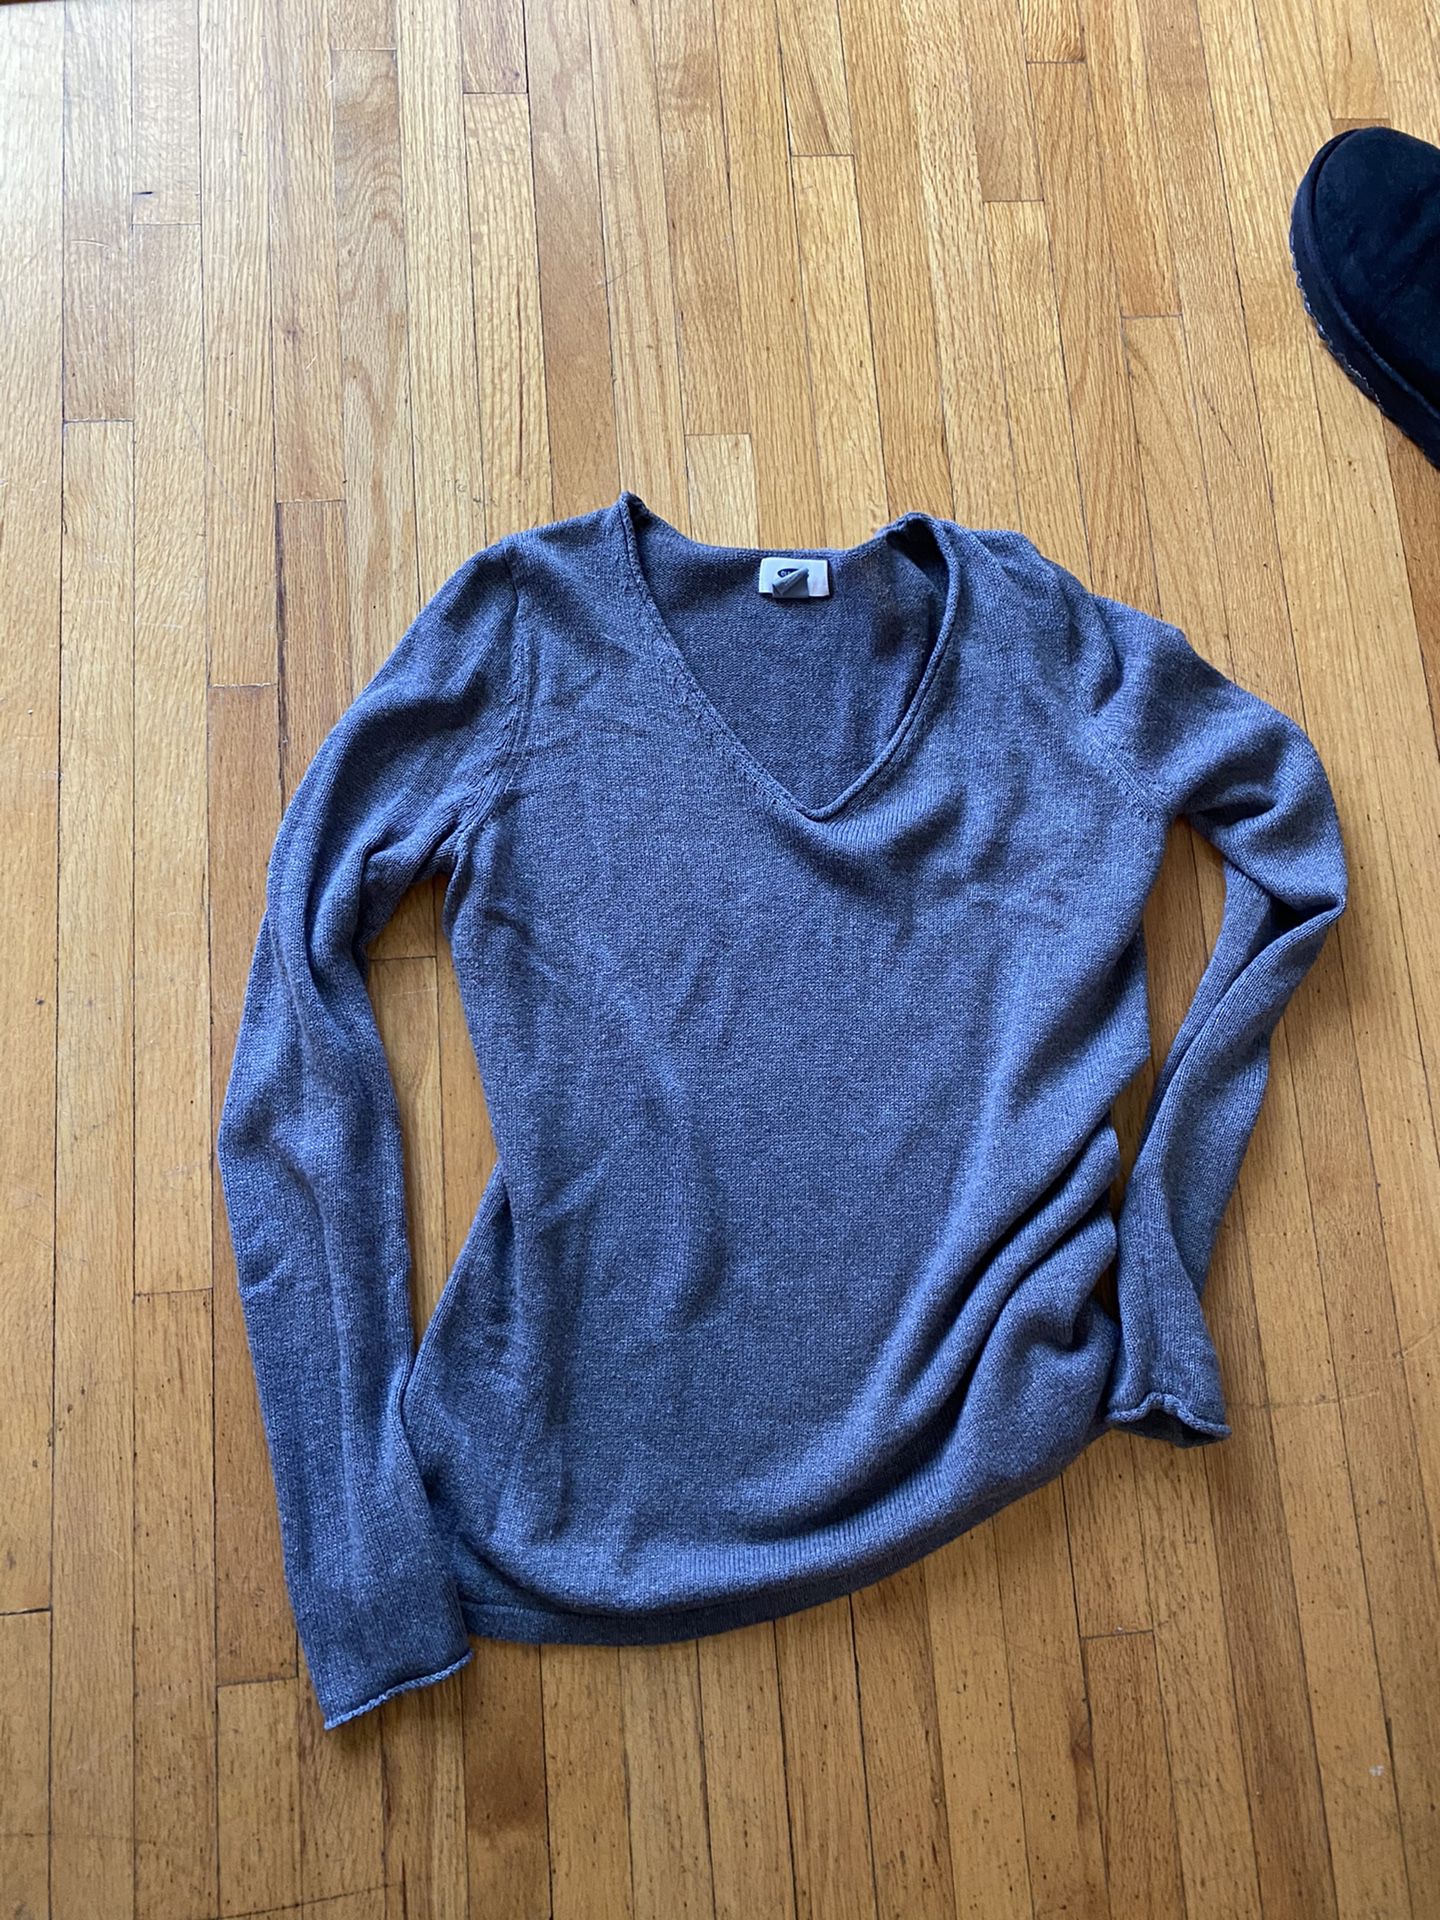 Random women’s clothing, size small and xs